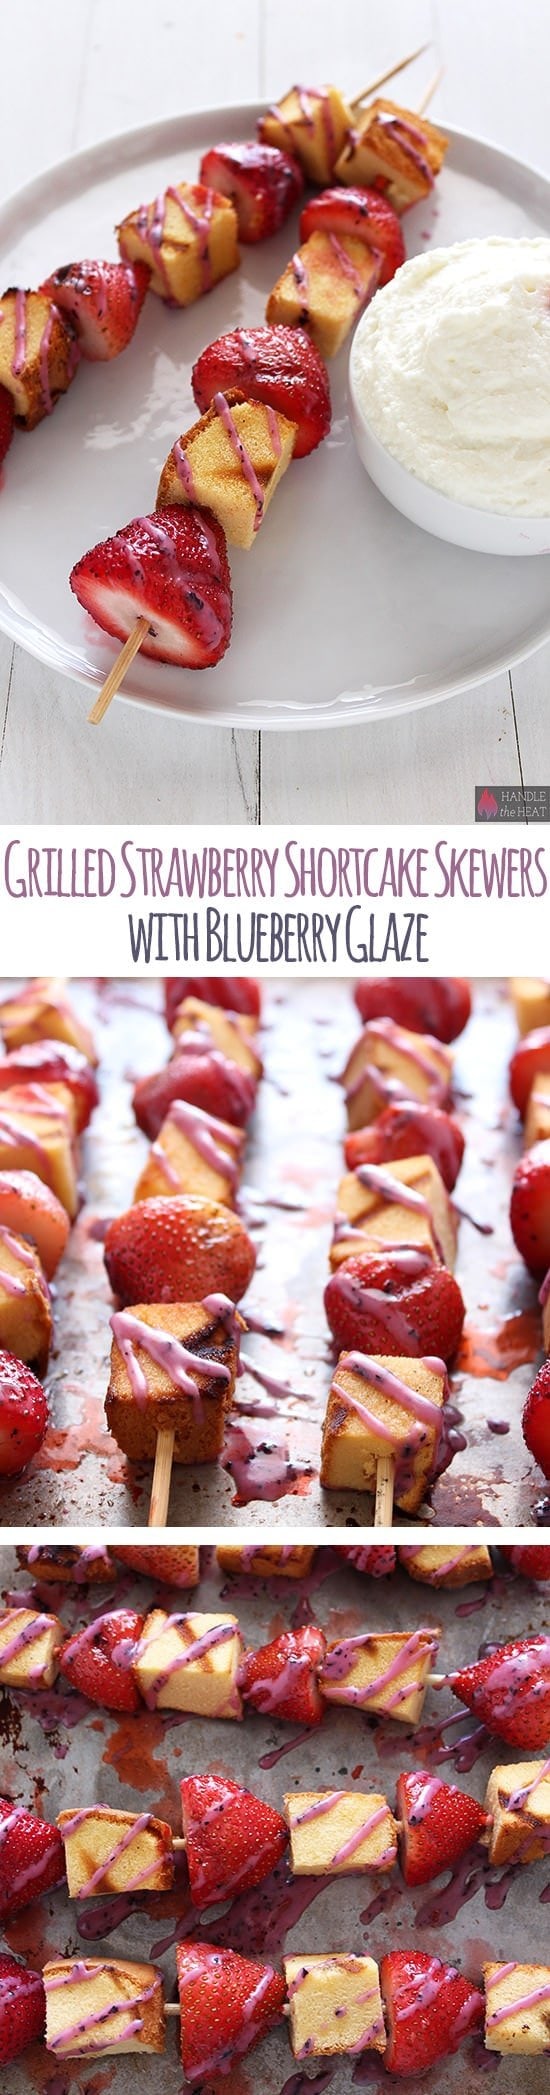 Grilled Strawberry Shortcake Skewers with Blueberry Glaze made with Mazola Corn Oil arethe perfect Fourth of July Recipe! #partner